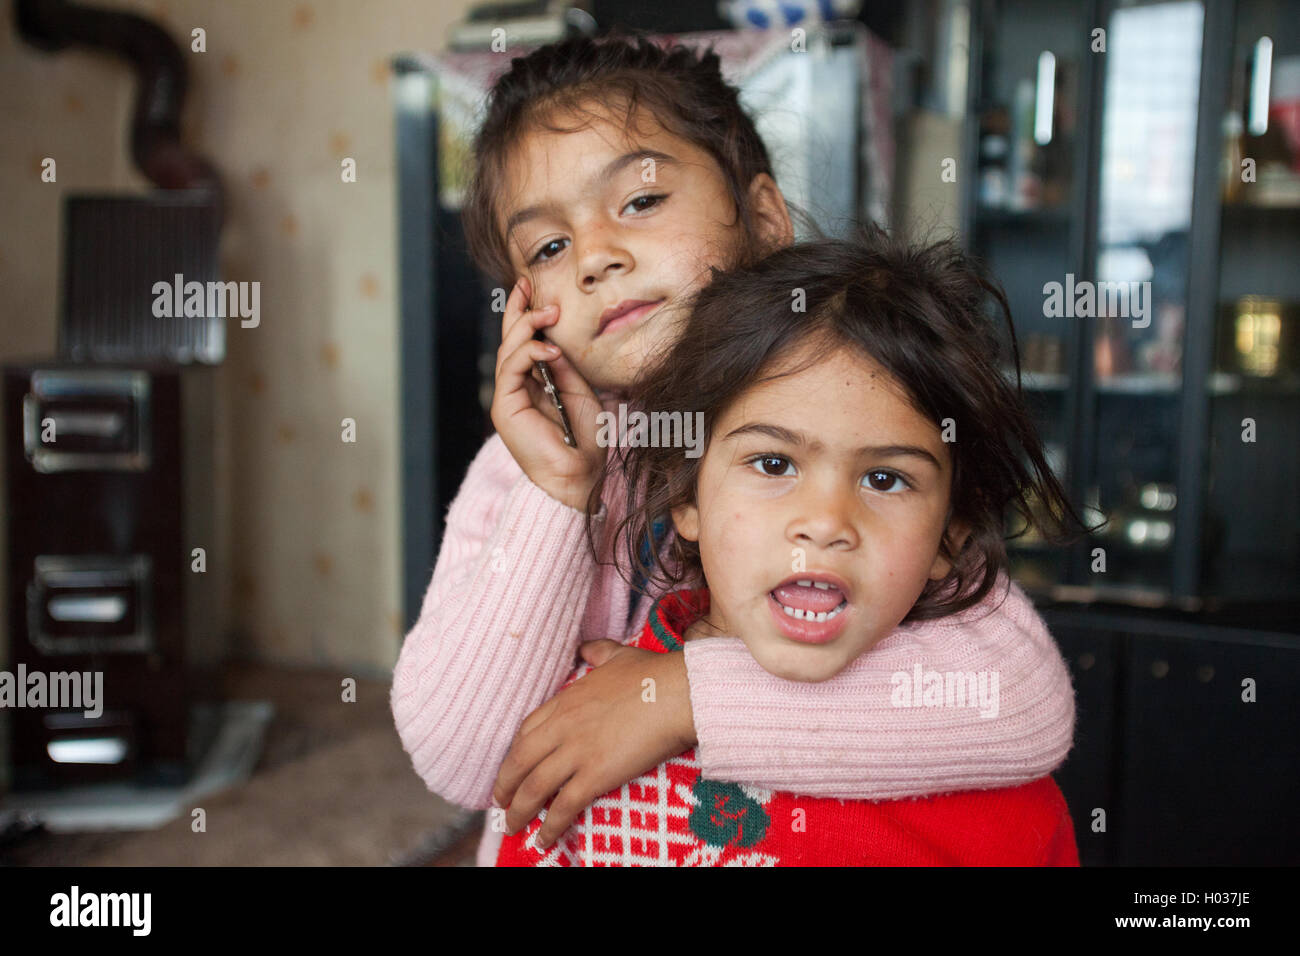 ZAGREB, CROATIA - OCTOBER 21, 2013: Portrait of little Roma girl hugging her sister and holding mobile phone. Stock Photo